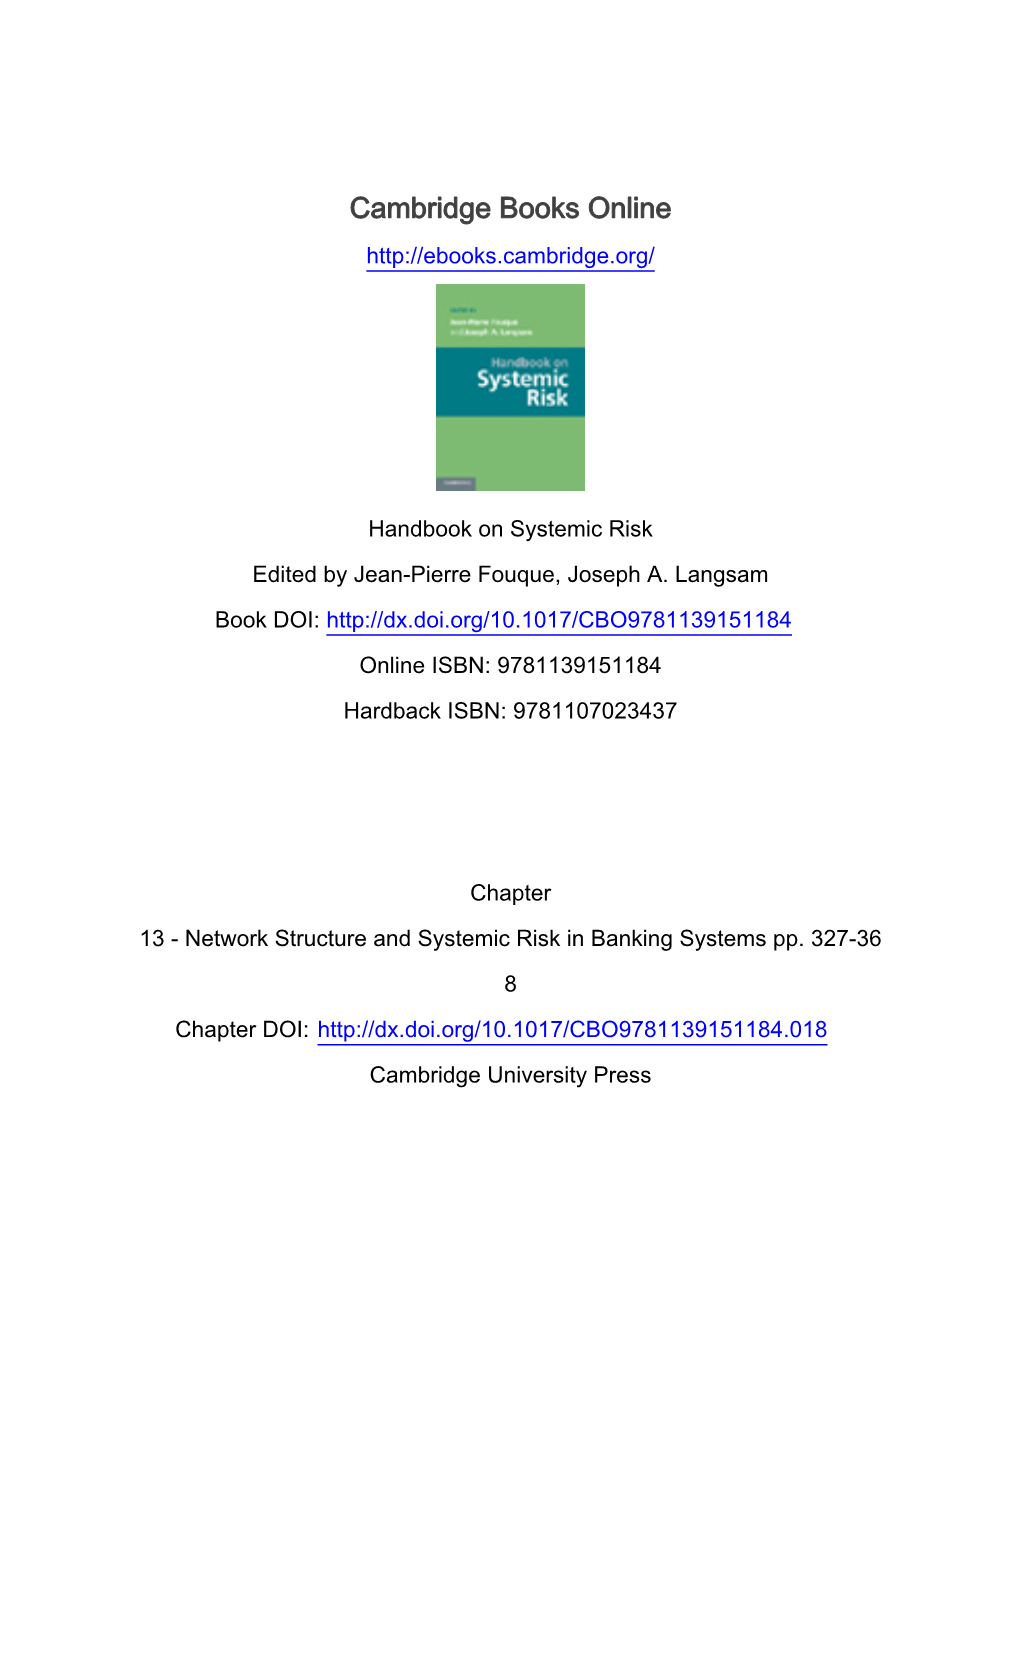 Network Structure and Systemic Risk in Banking Systems Pp